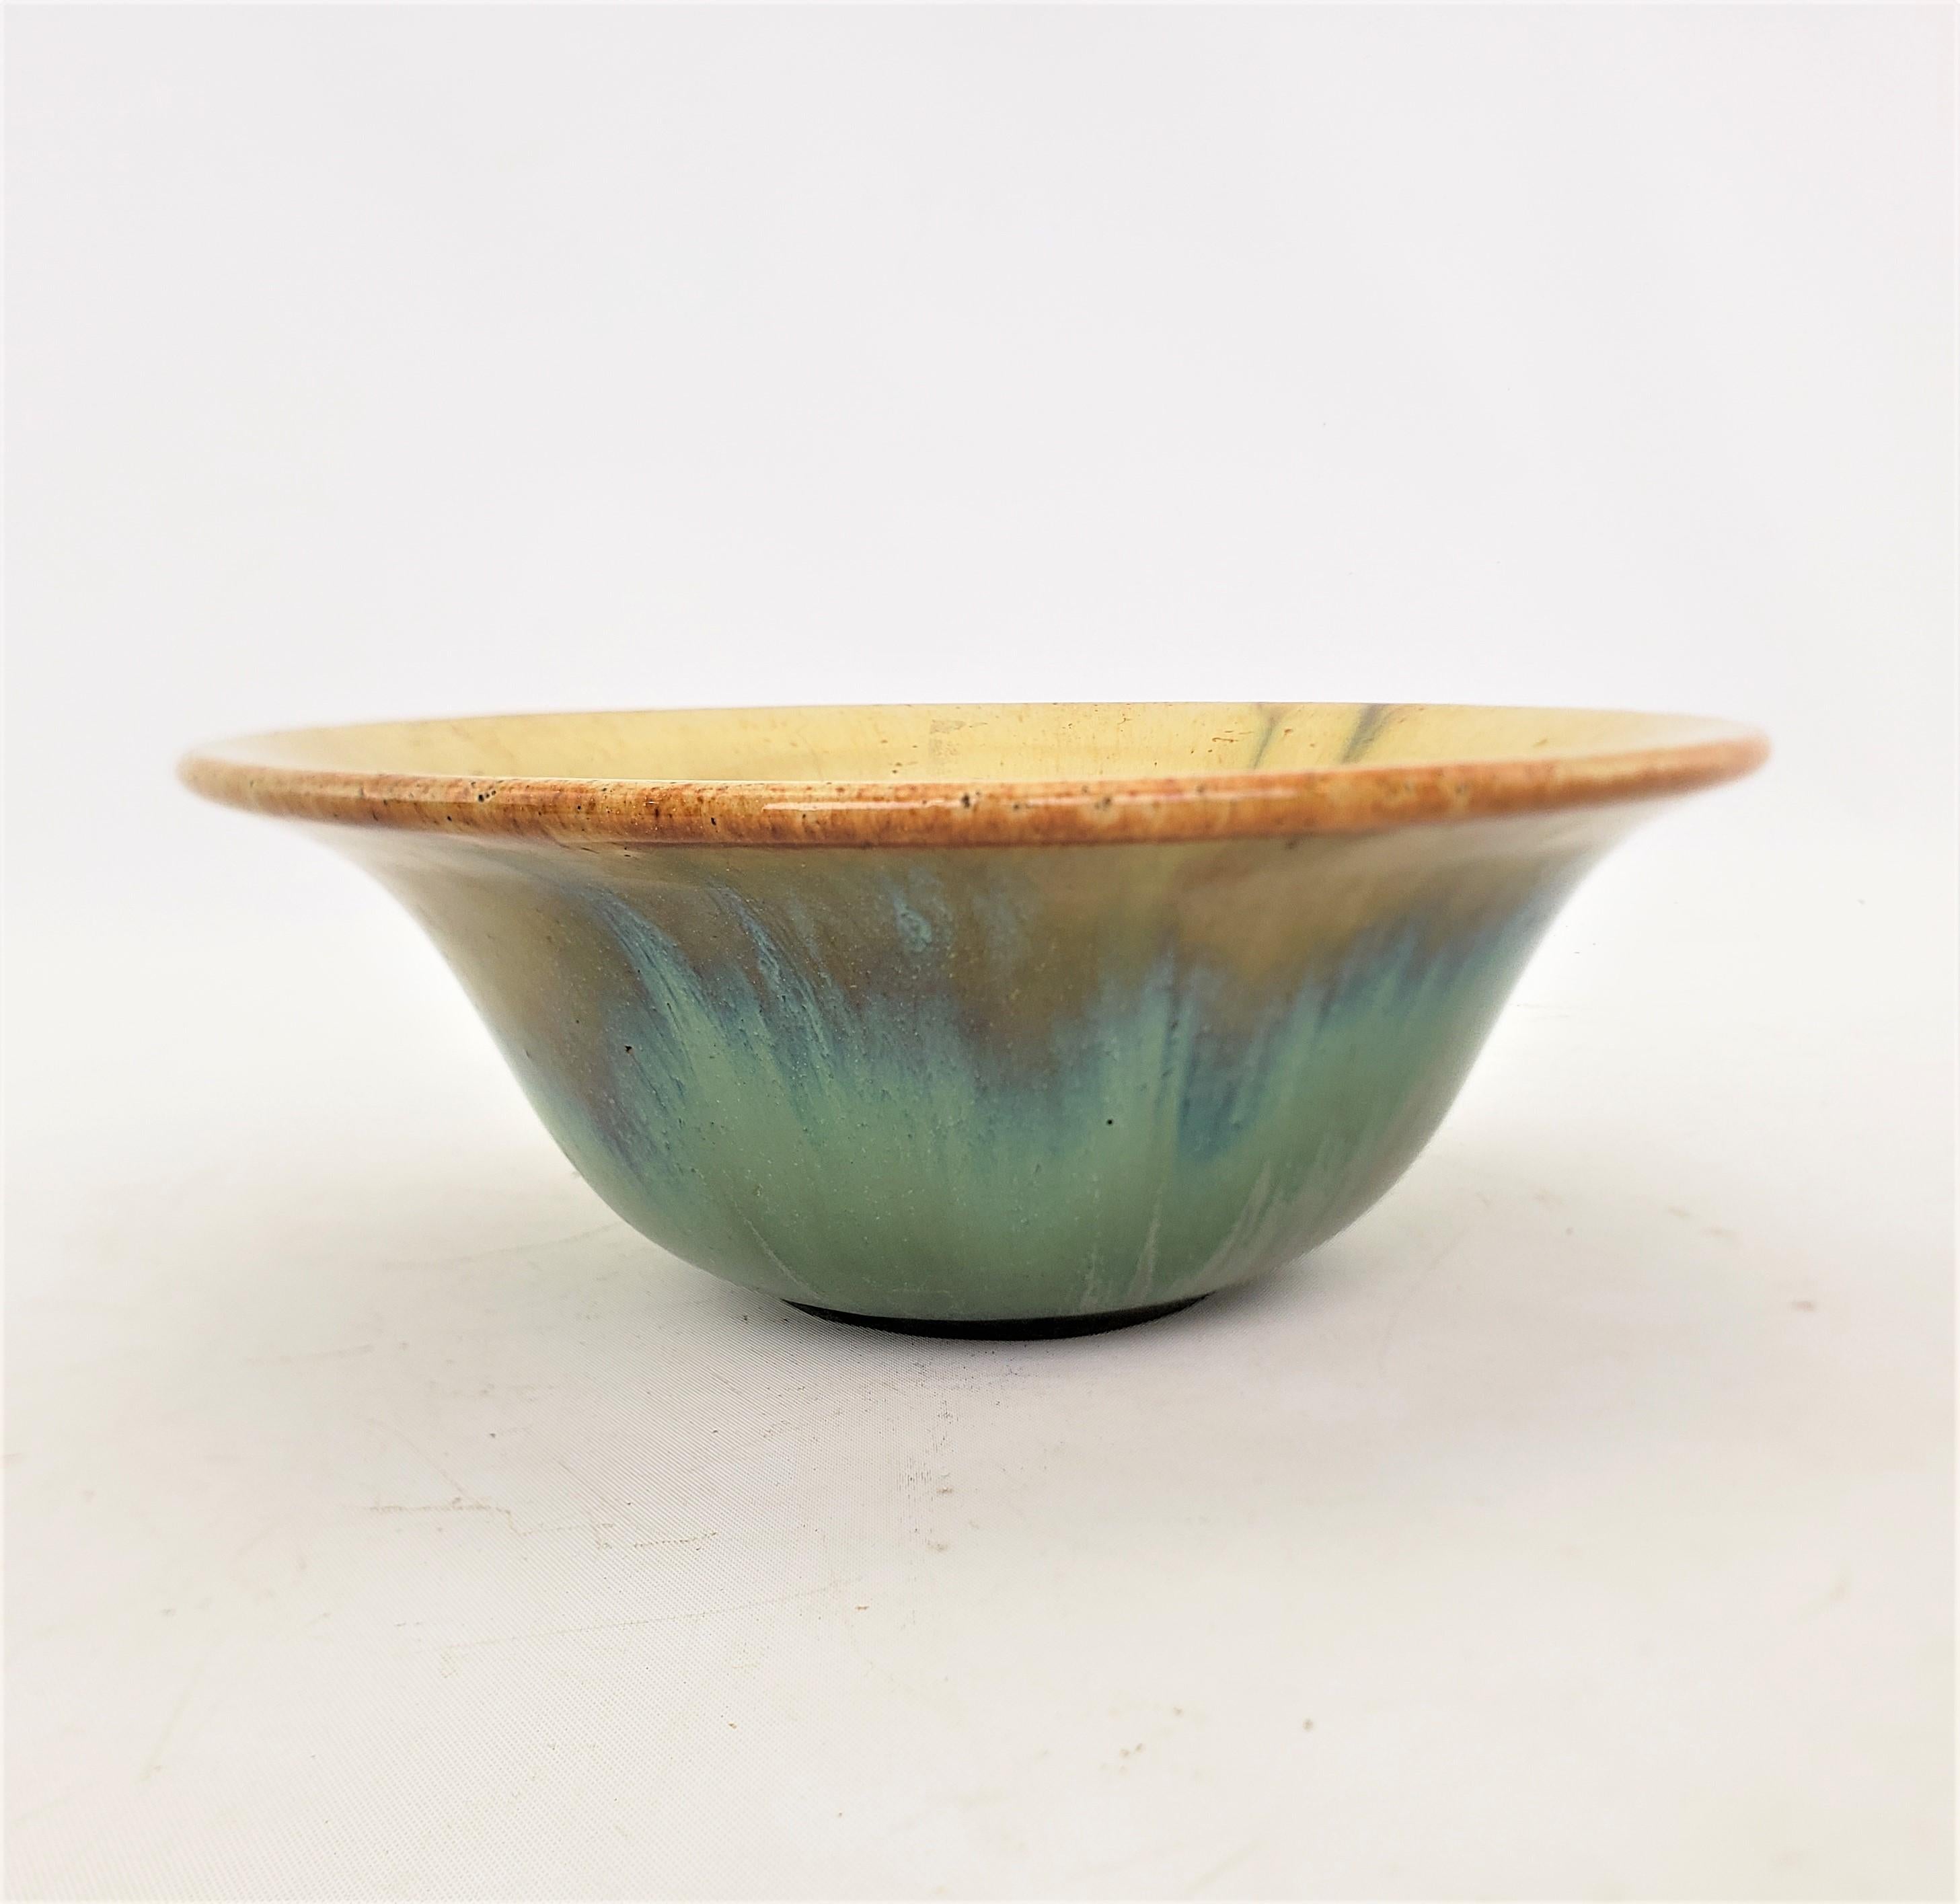 Antique Fulper Art Pottery Bowl with Blue, Green & Turquoise Glaze In Good Condition For Sale In Hamilton, Ontario